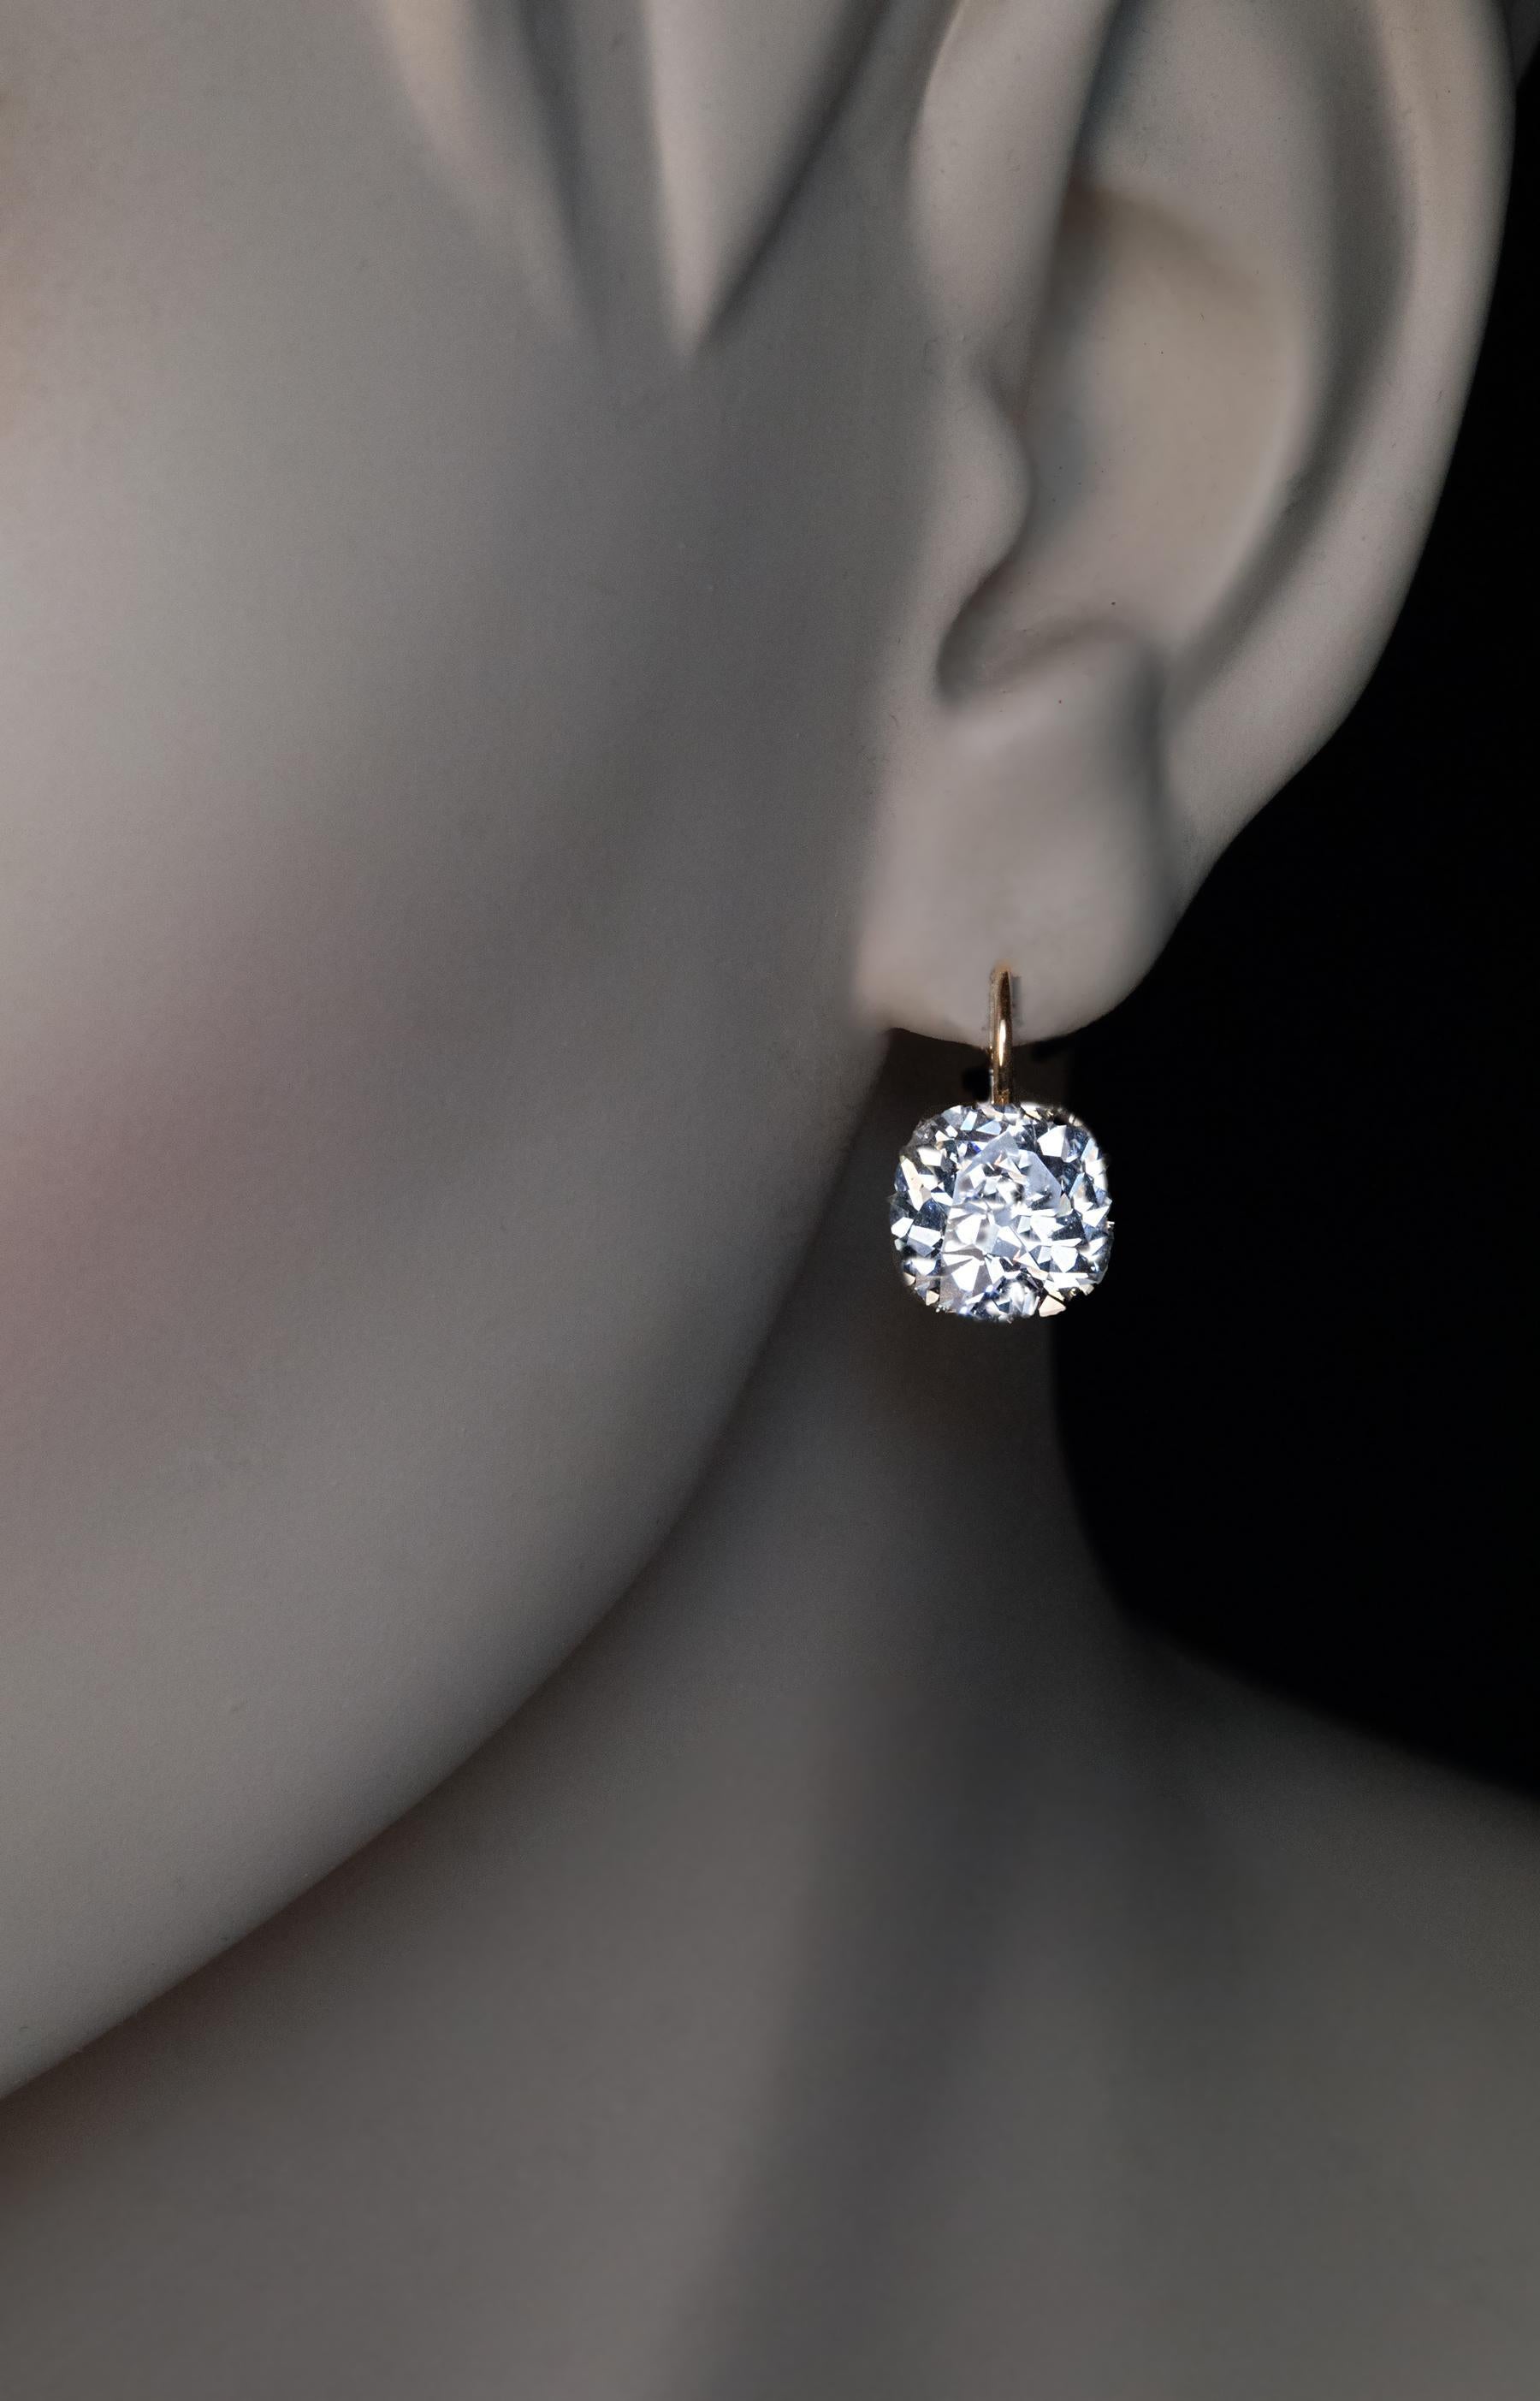 Circa 1890
These very rare antique Russian gold earrings feature two excellent old cushion cut diamonds: 2.60 cts (J color, SI1 clarity) and 2.47 cts (K color, VS2 clarity).
Total diamond weight is 5.07 carats.
Marked with 56 zolotnik old Russian